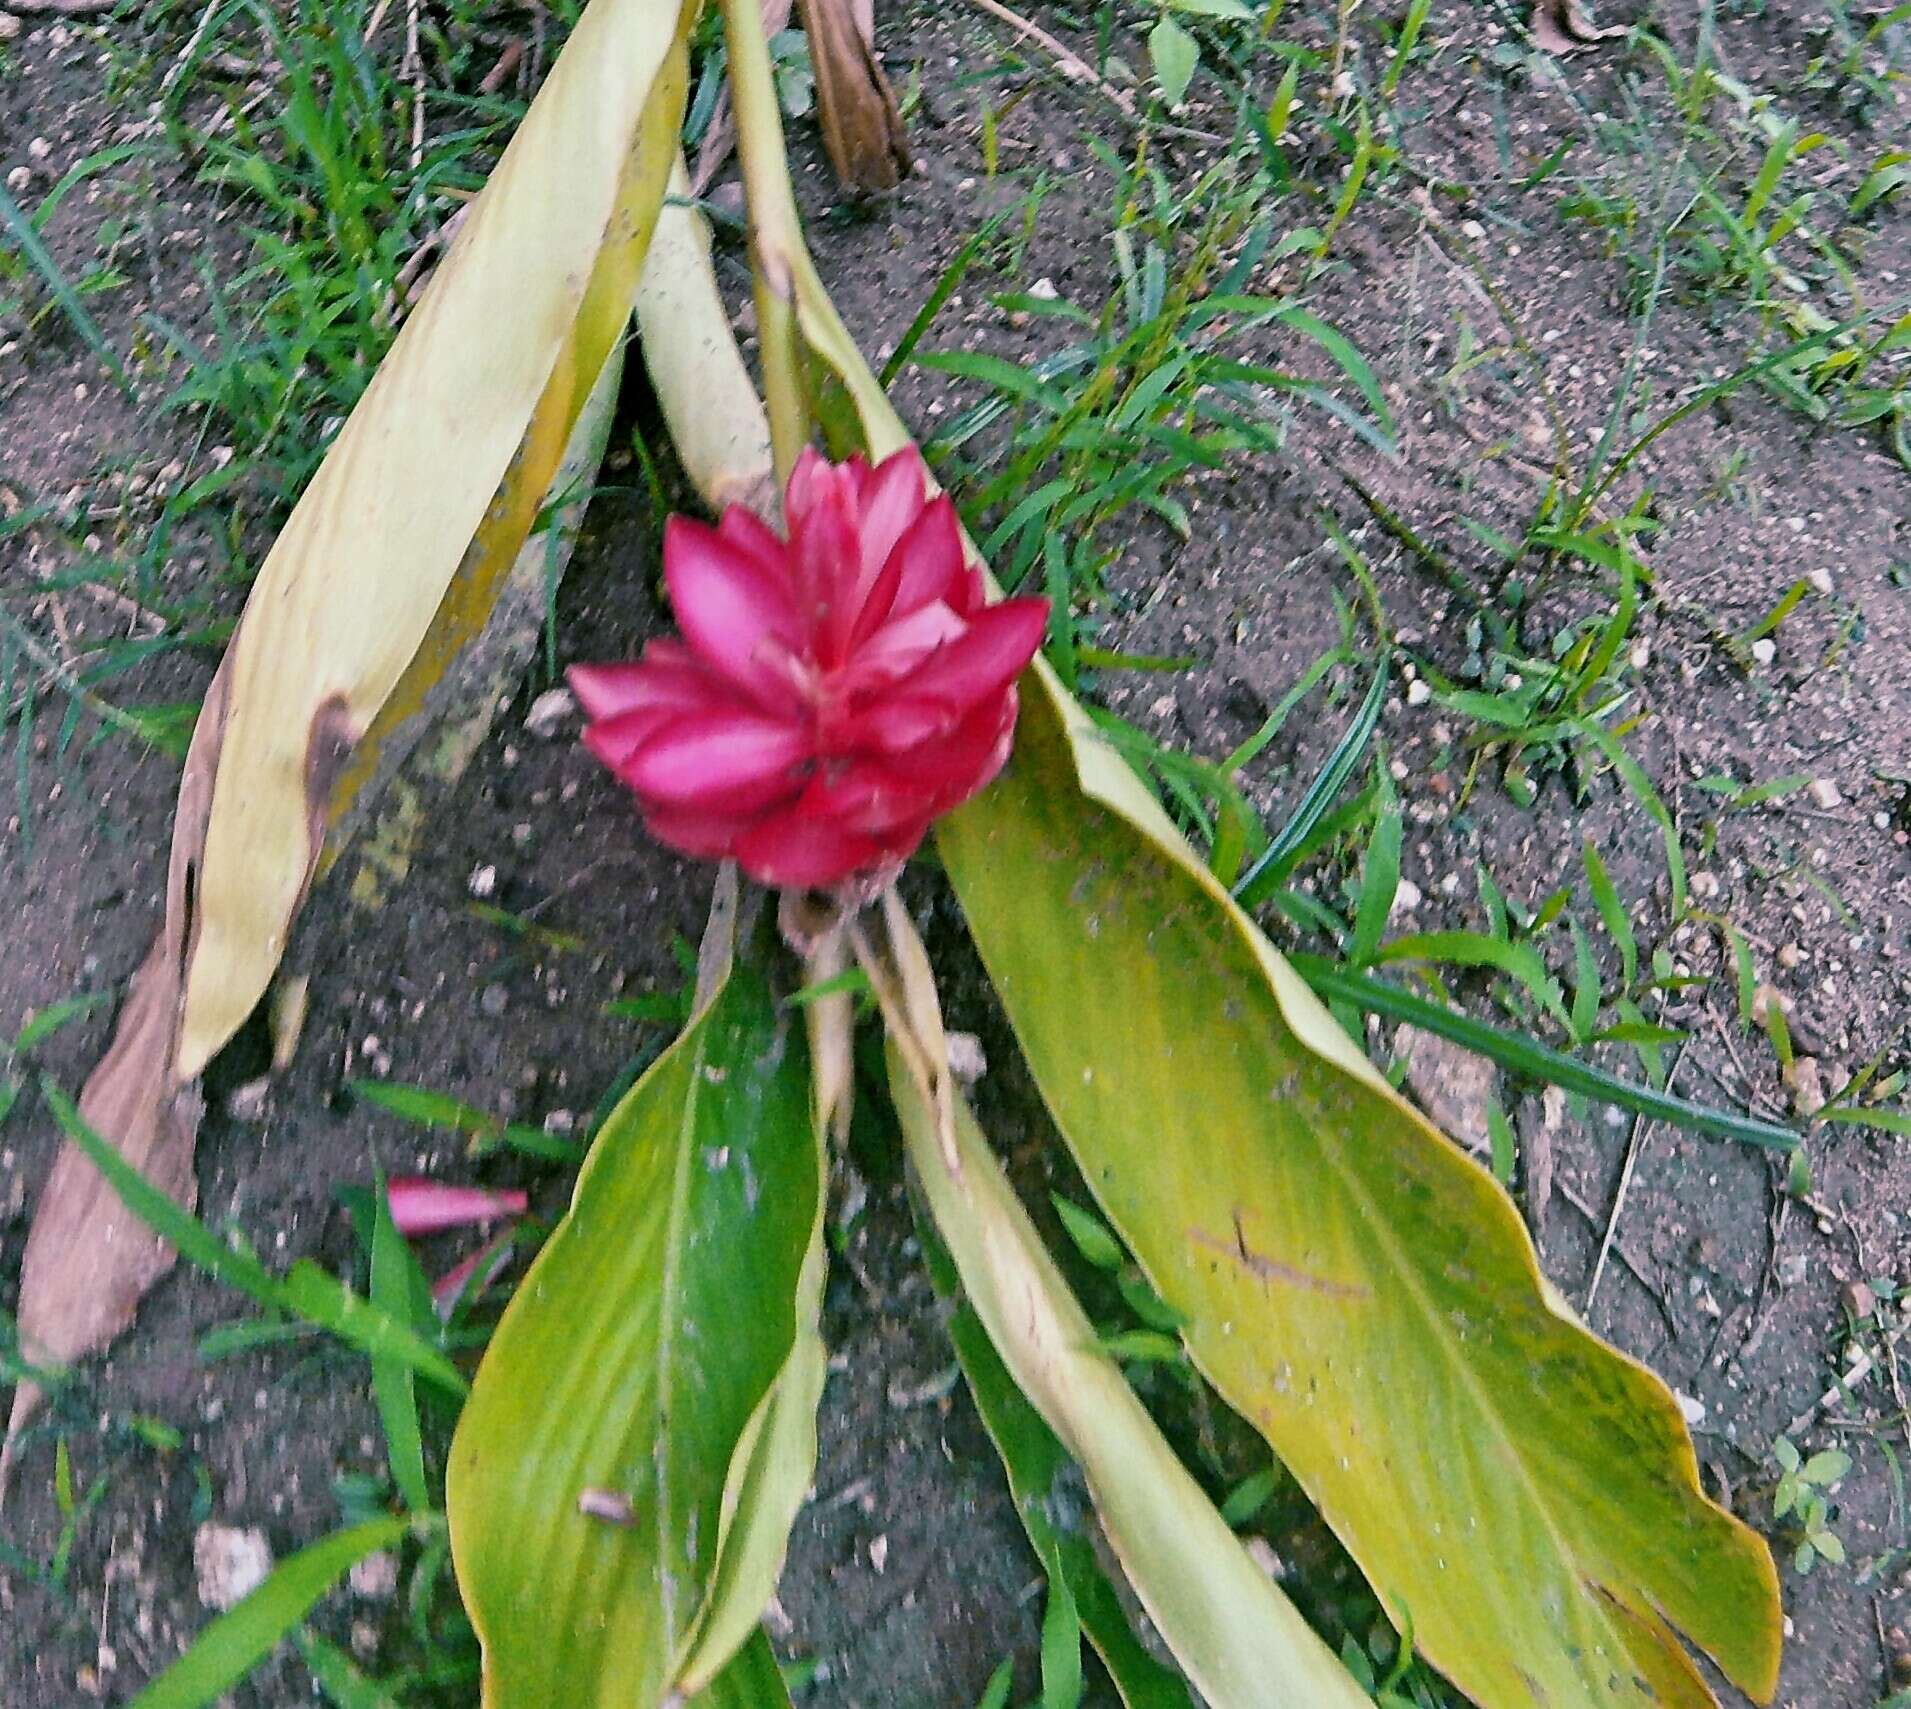 Image of red ginger